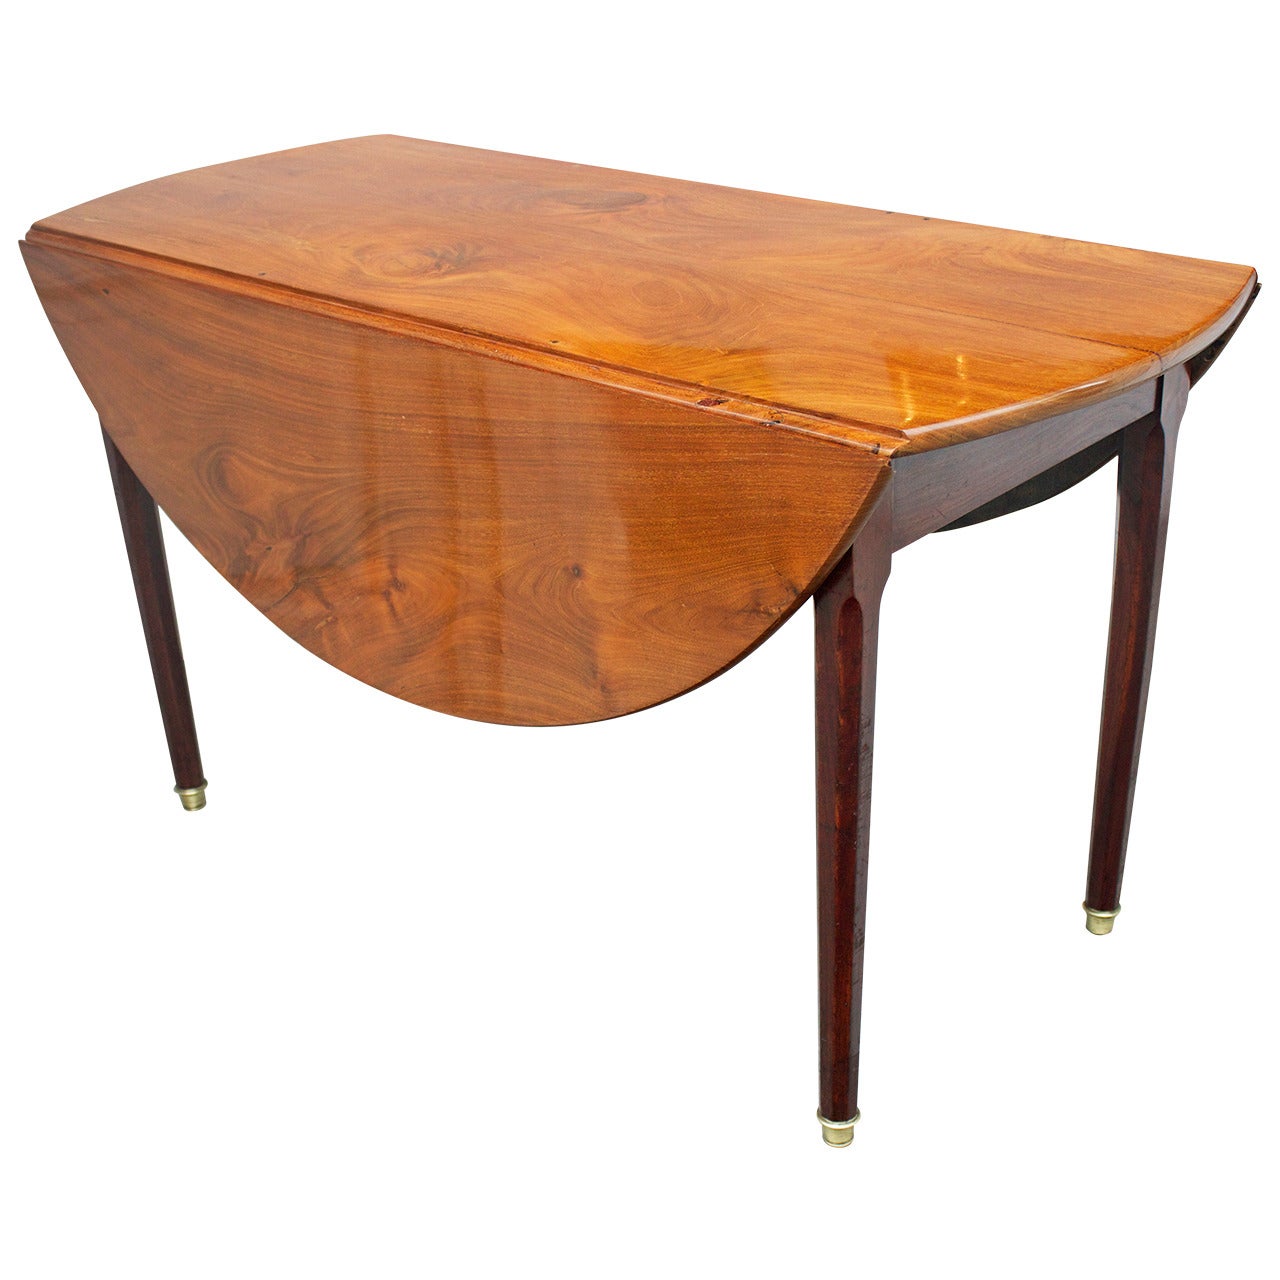 19th Century French Mahogany Round Drop-Leaf Table For Sale